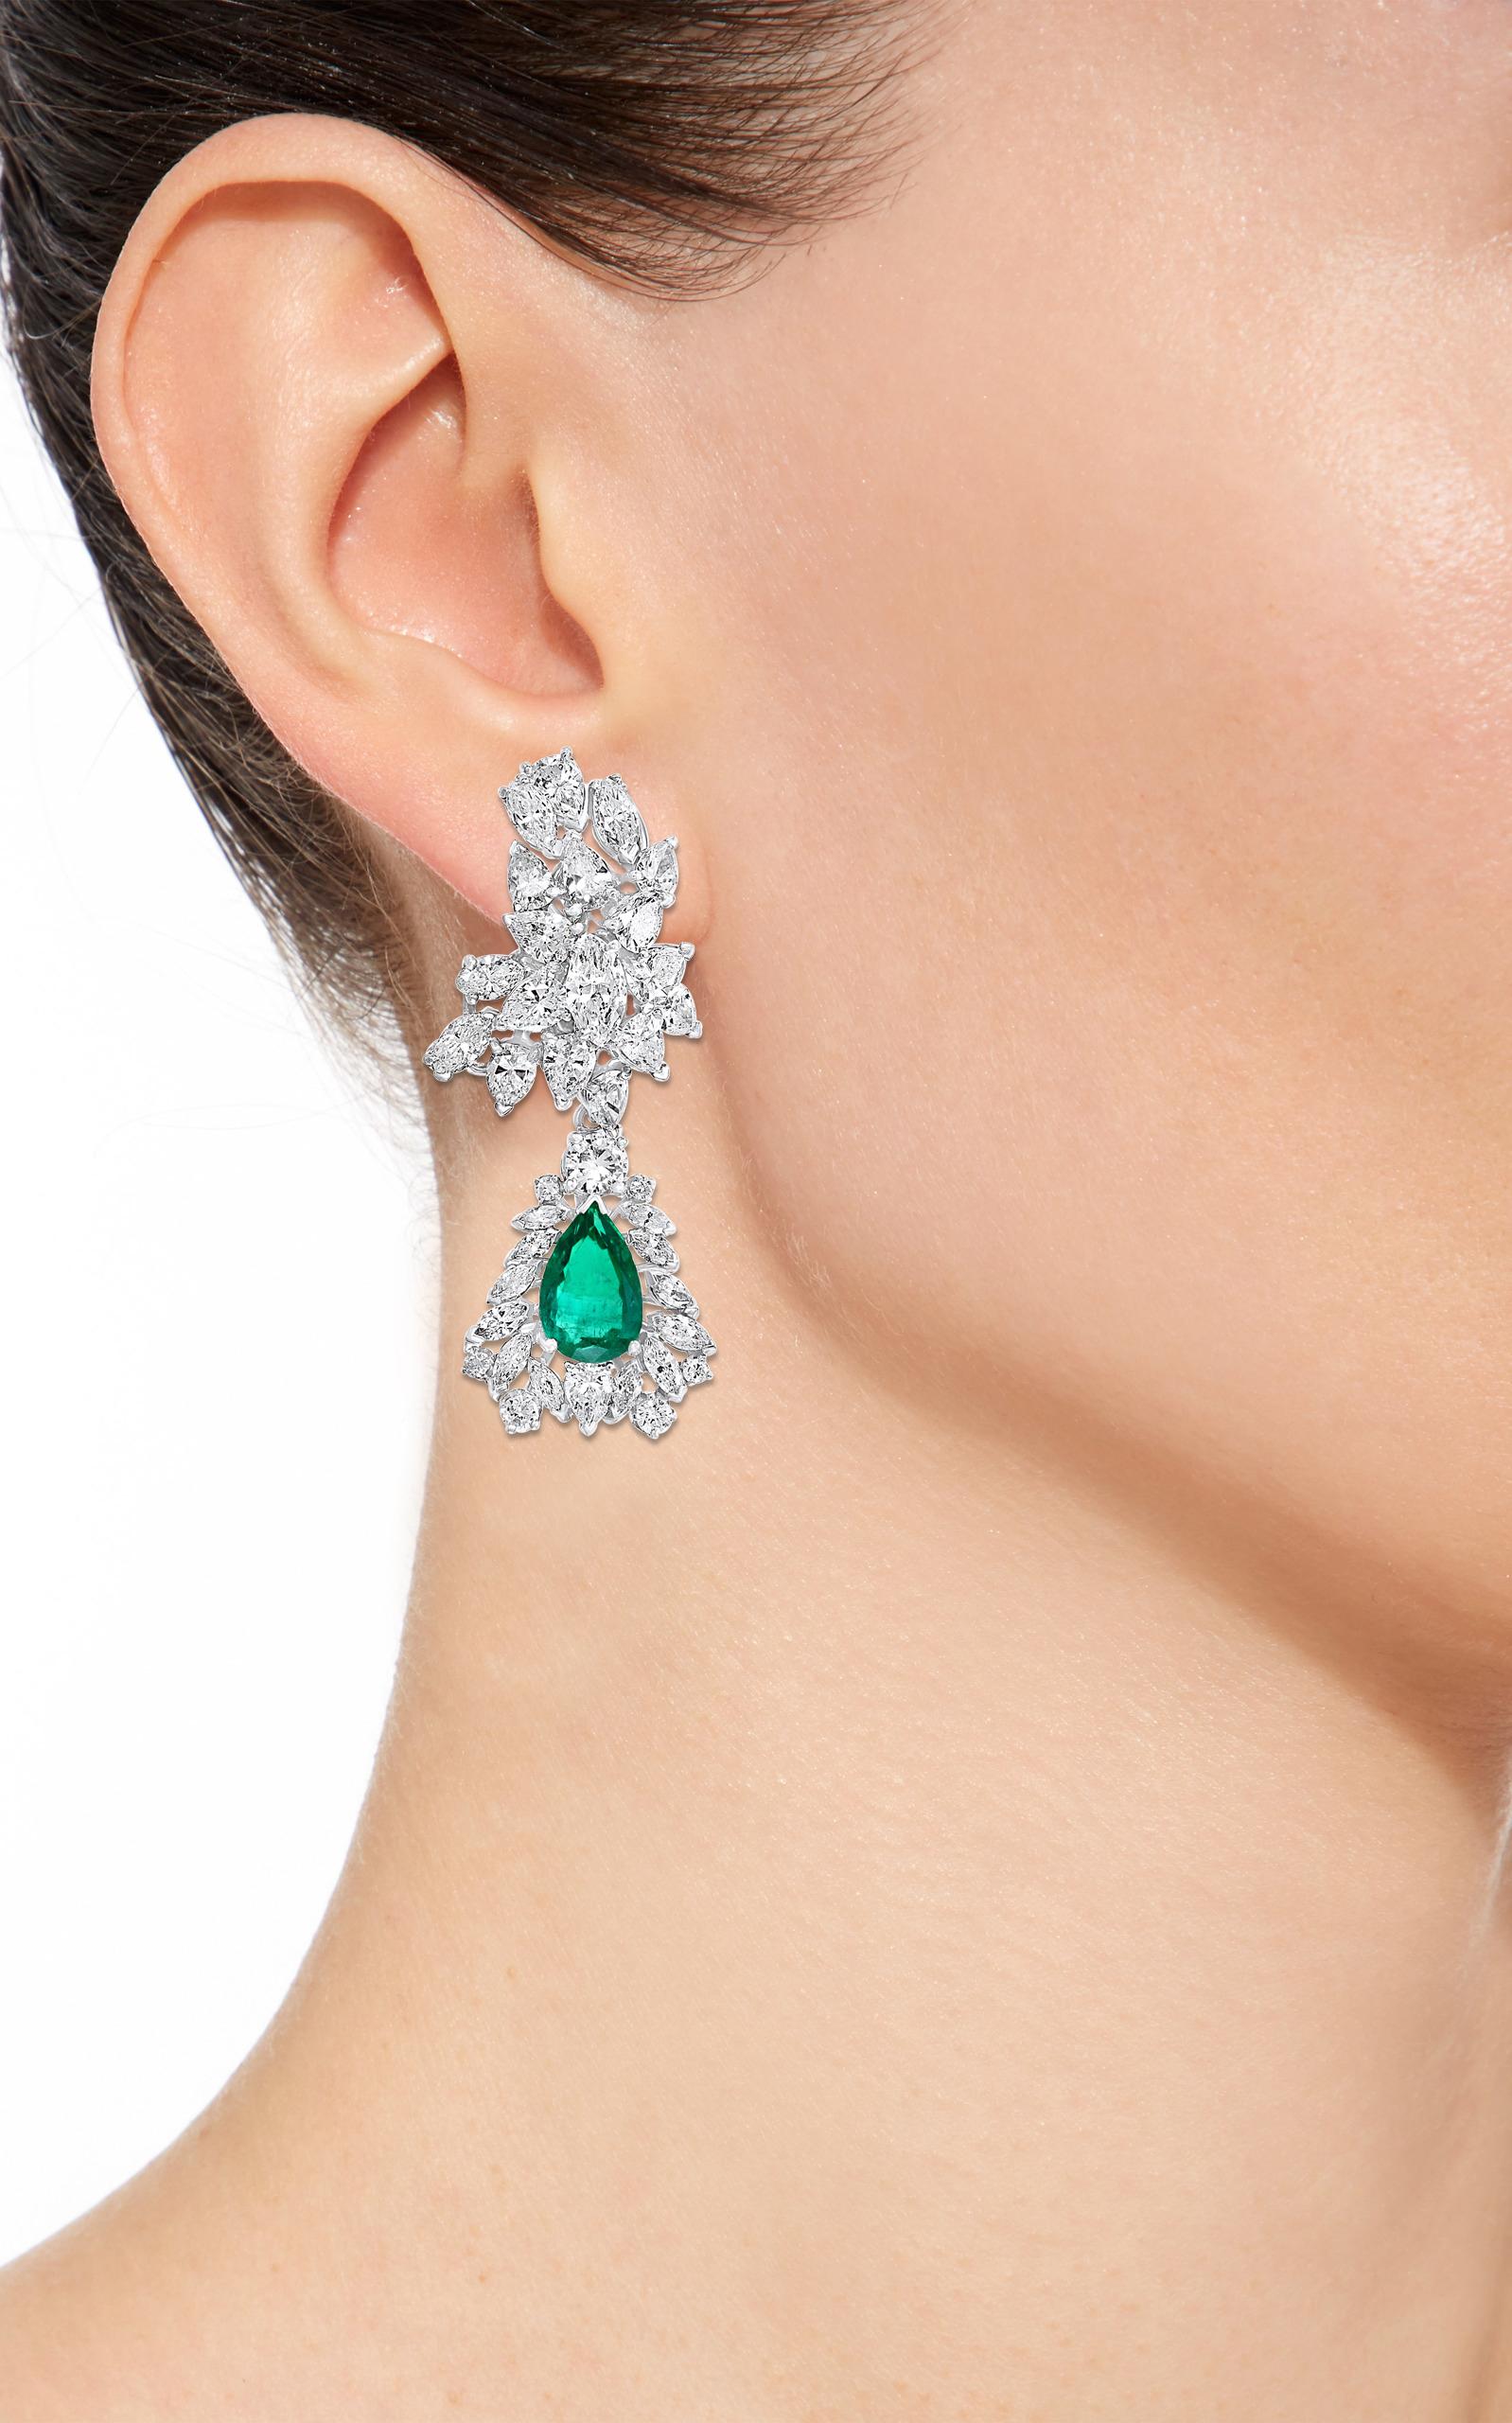 1960 AGL Certified Colombian Minor Traditional Emerald Diamond Drop Earrings PT
These Earrings are detachable meaning pendulum with emeralds  and Diamond  slides off so the top Diamond Earrings can be worn alone.
This exquisite pair of earrings are